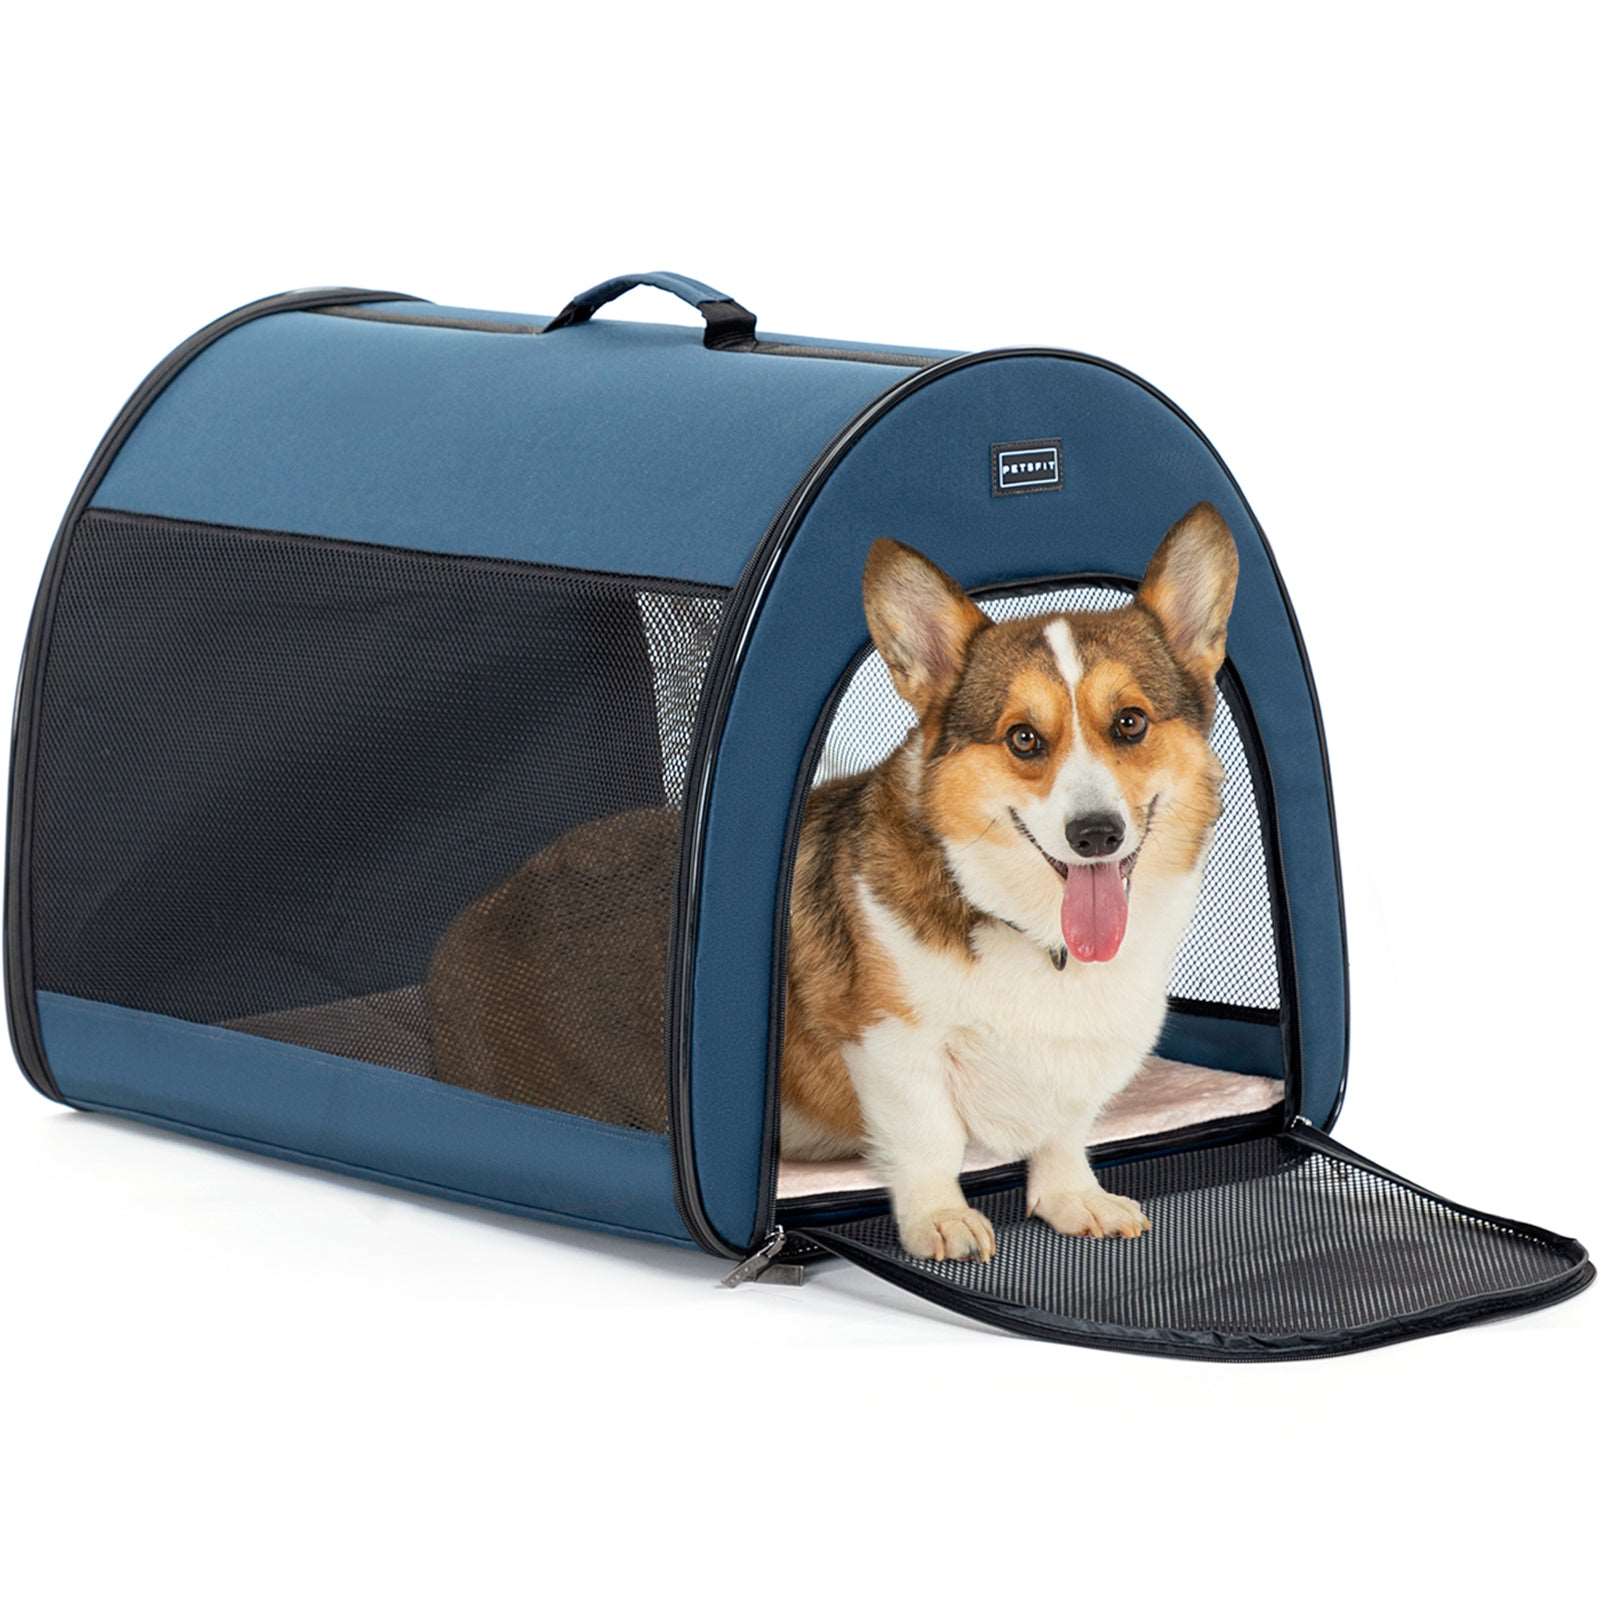 Petsfit-Arch-Design-Soft-Sided-Portable-Dog-Crate-10